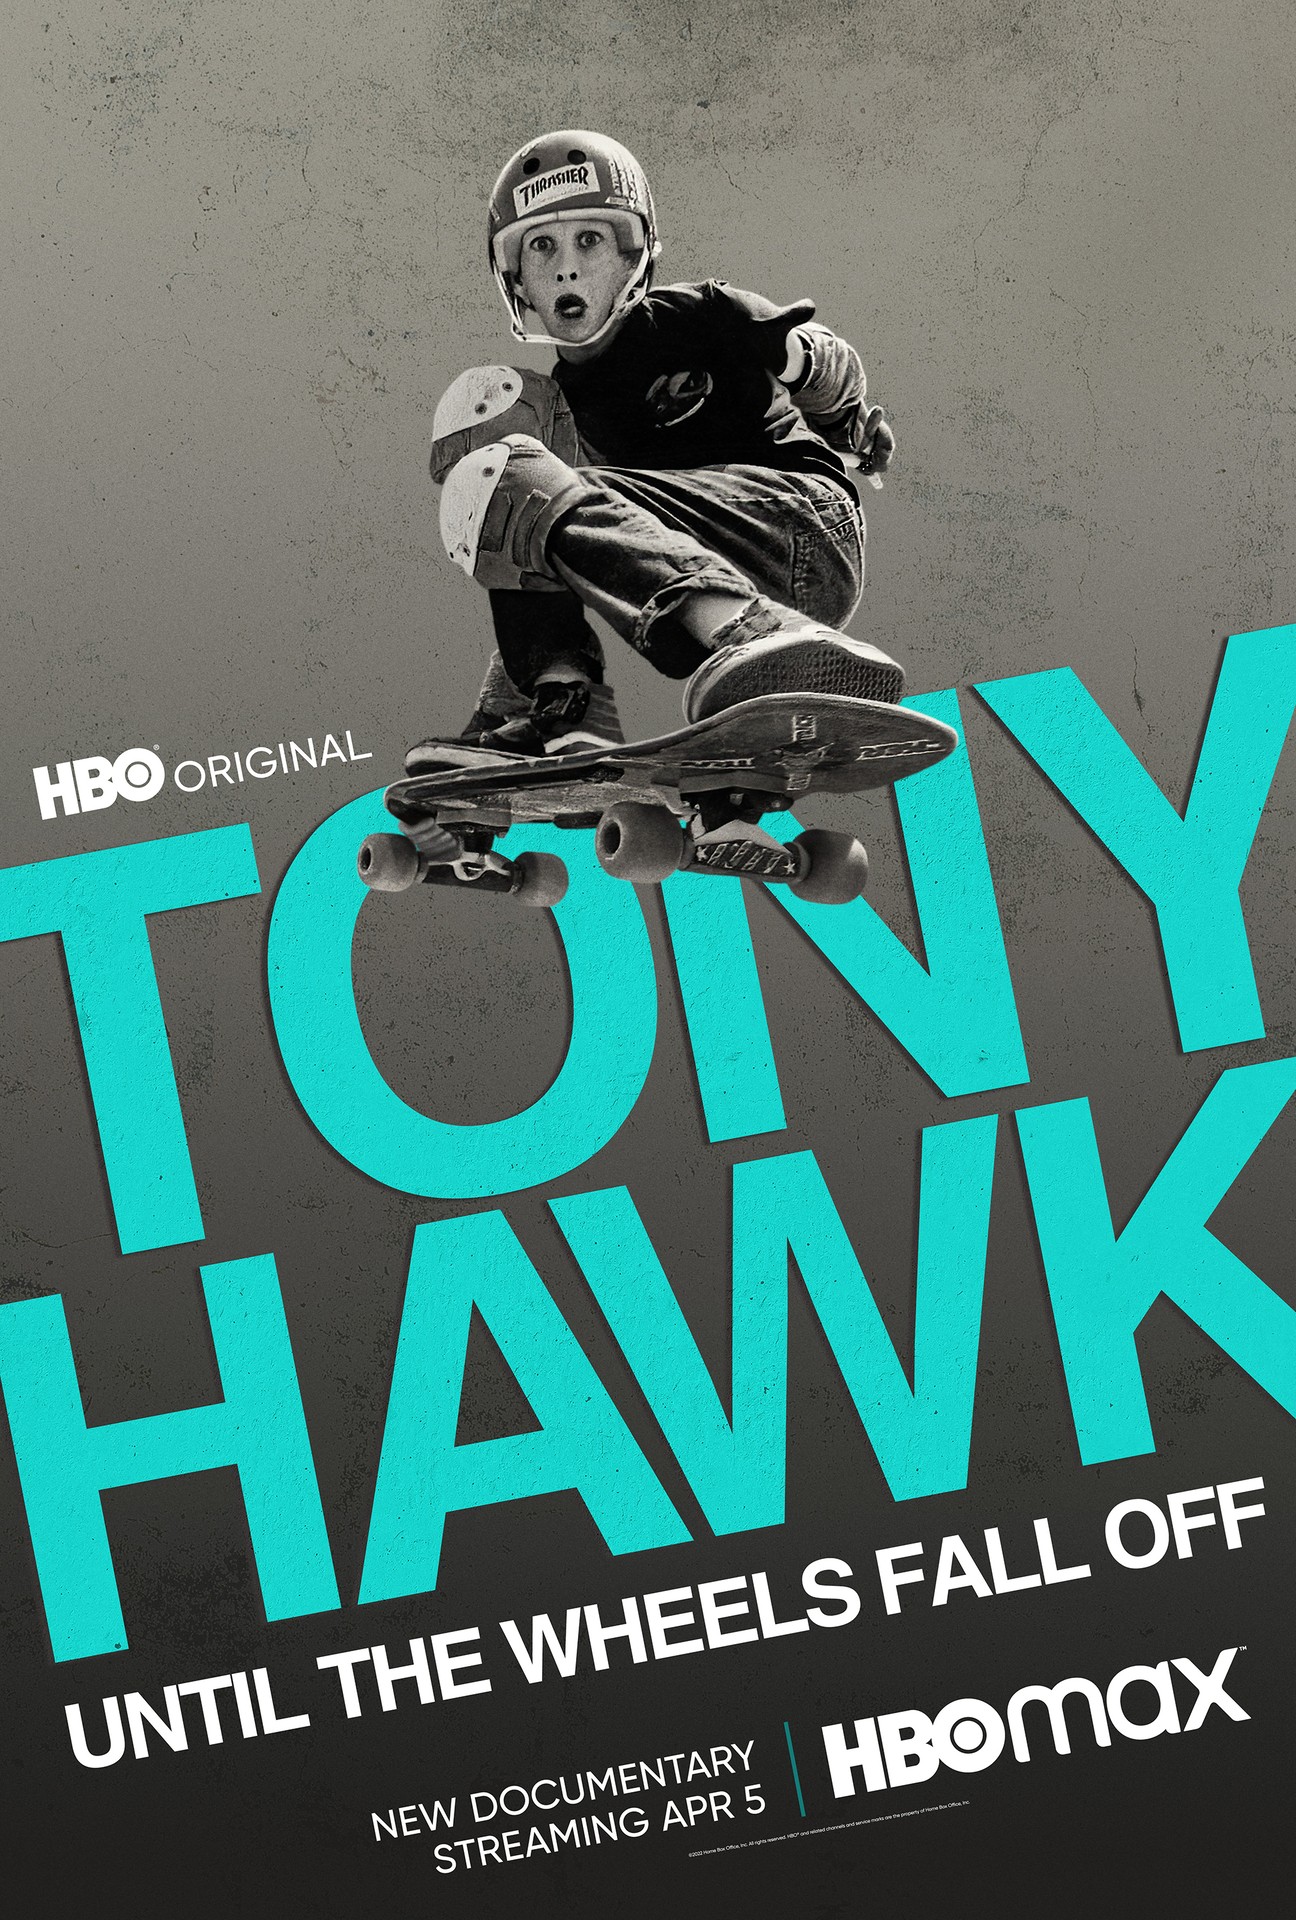 The Music Of 'Tony Hawk's Pro Skater' And Its Emotional Legacy : NPR